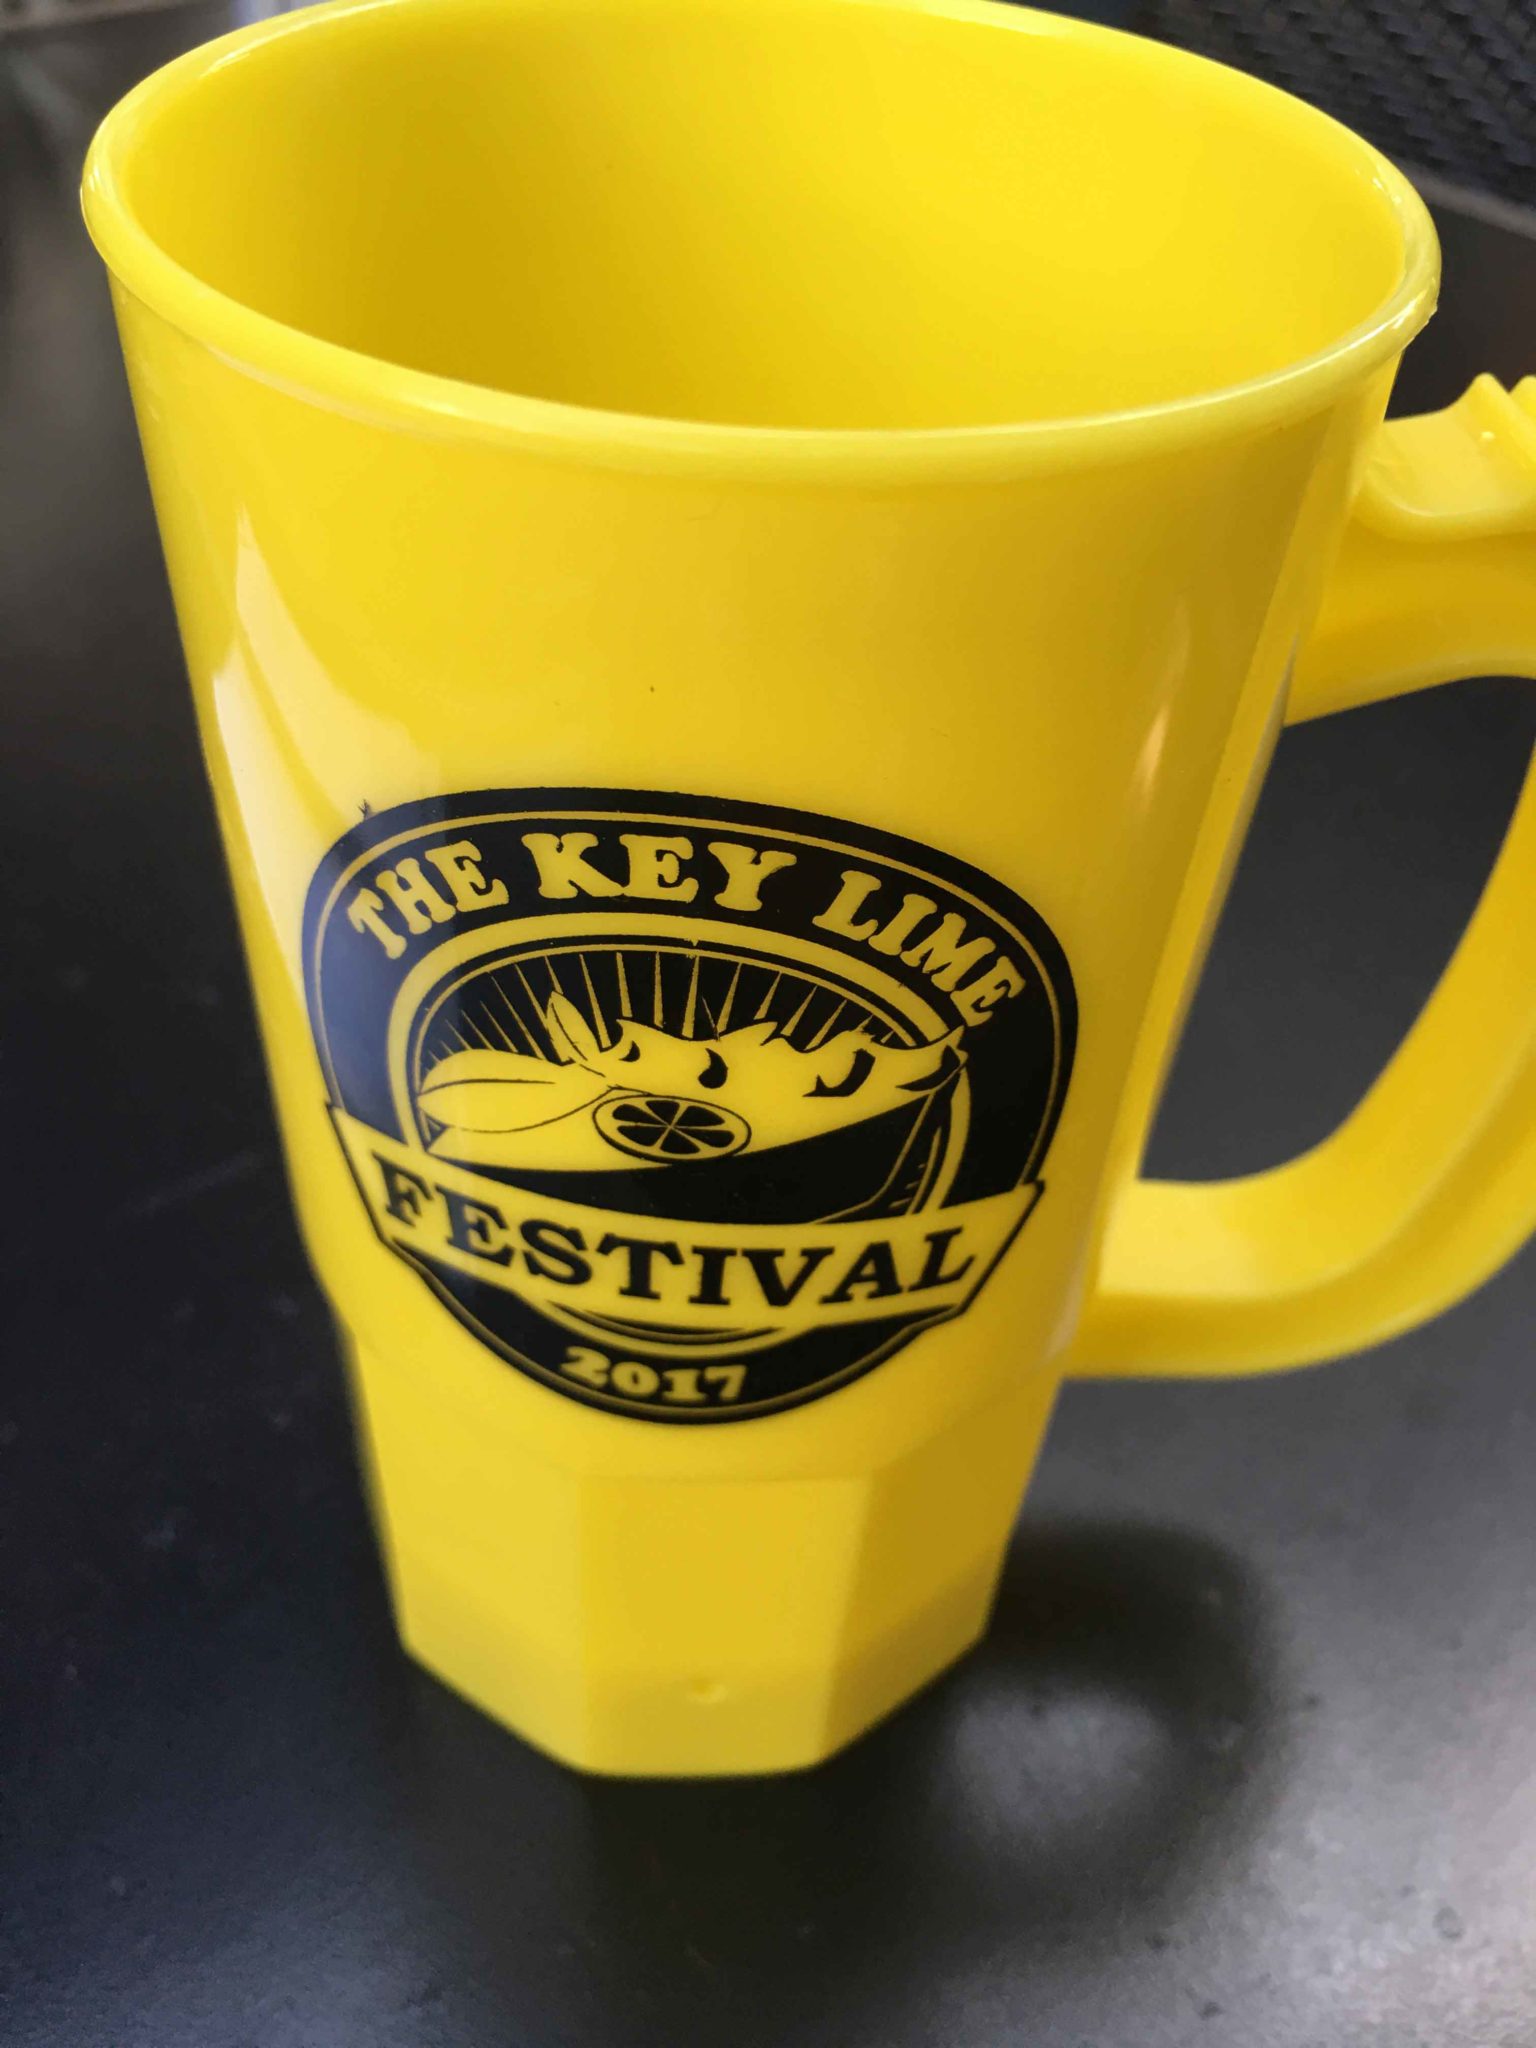 Sip & Stroll Key Lime Festival a List of Do’s and Don’ts